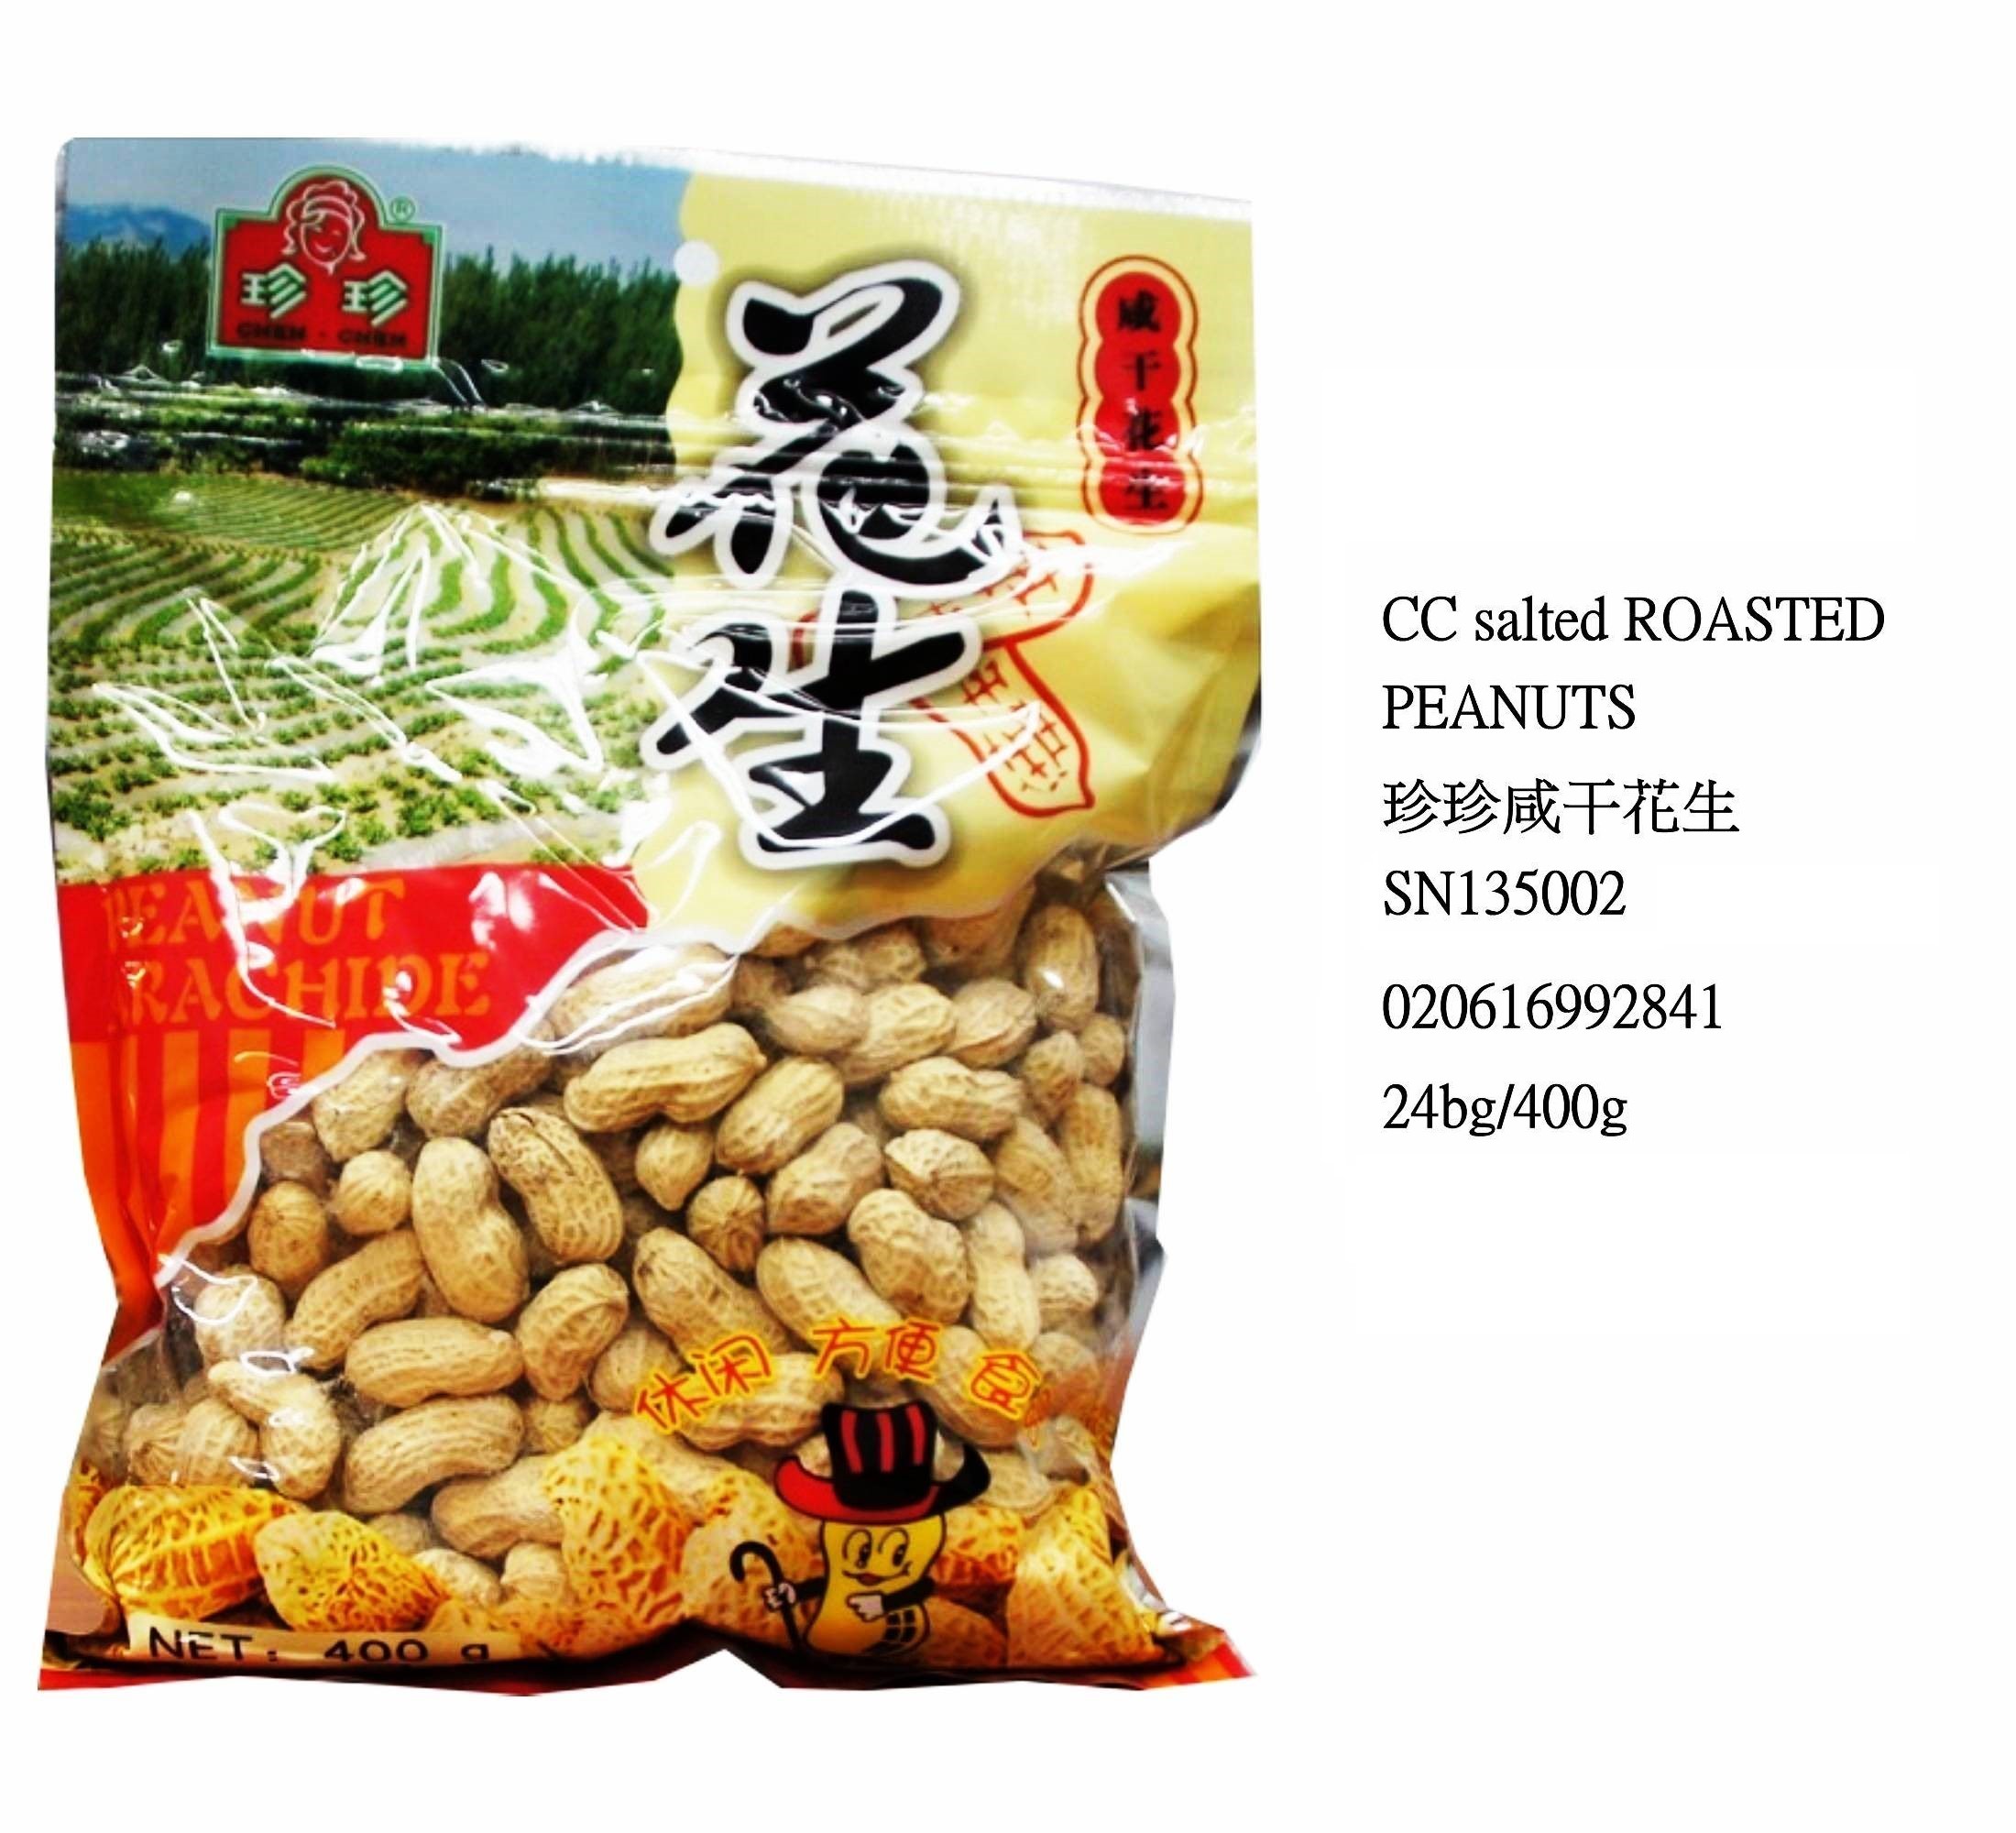 CHEN CHEN SALTED ROASTED PEANUTS SN135002